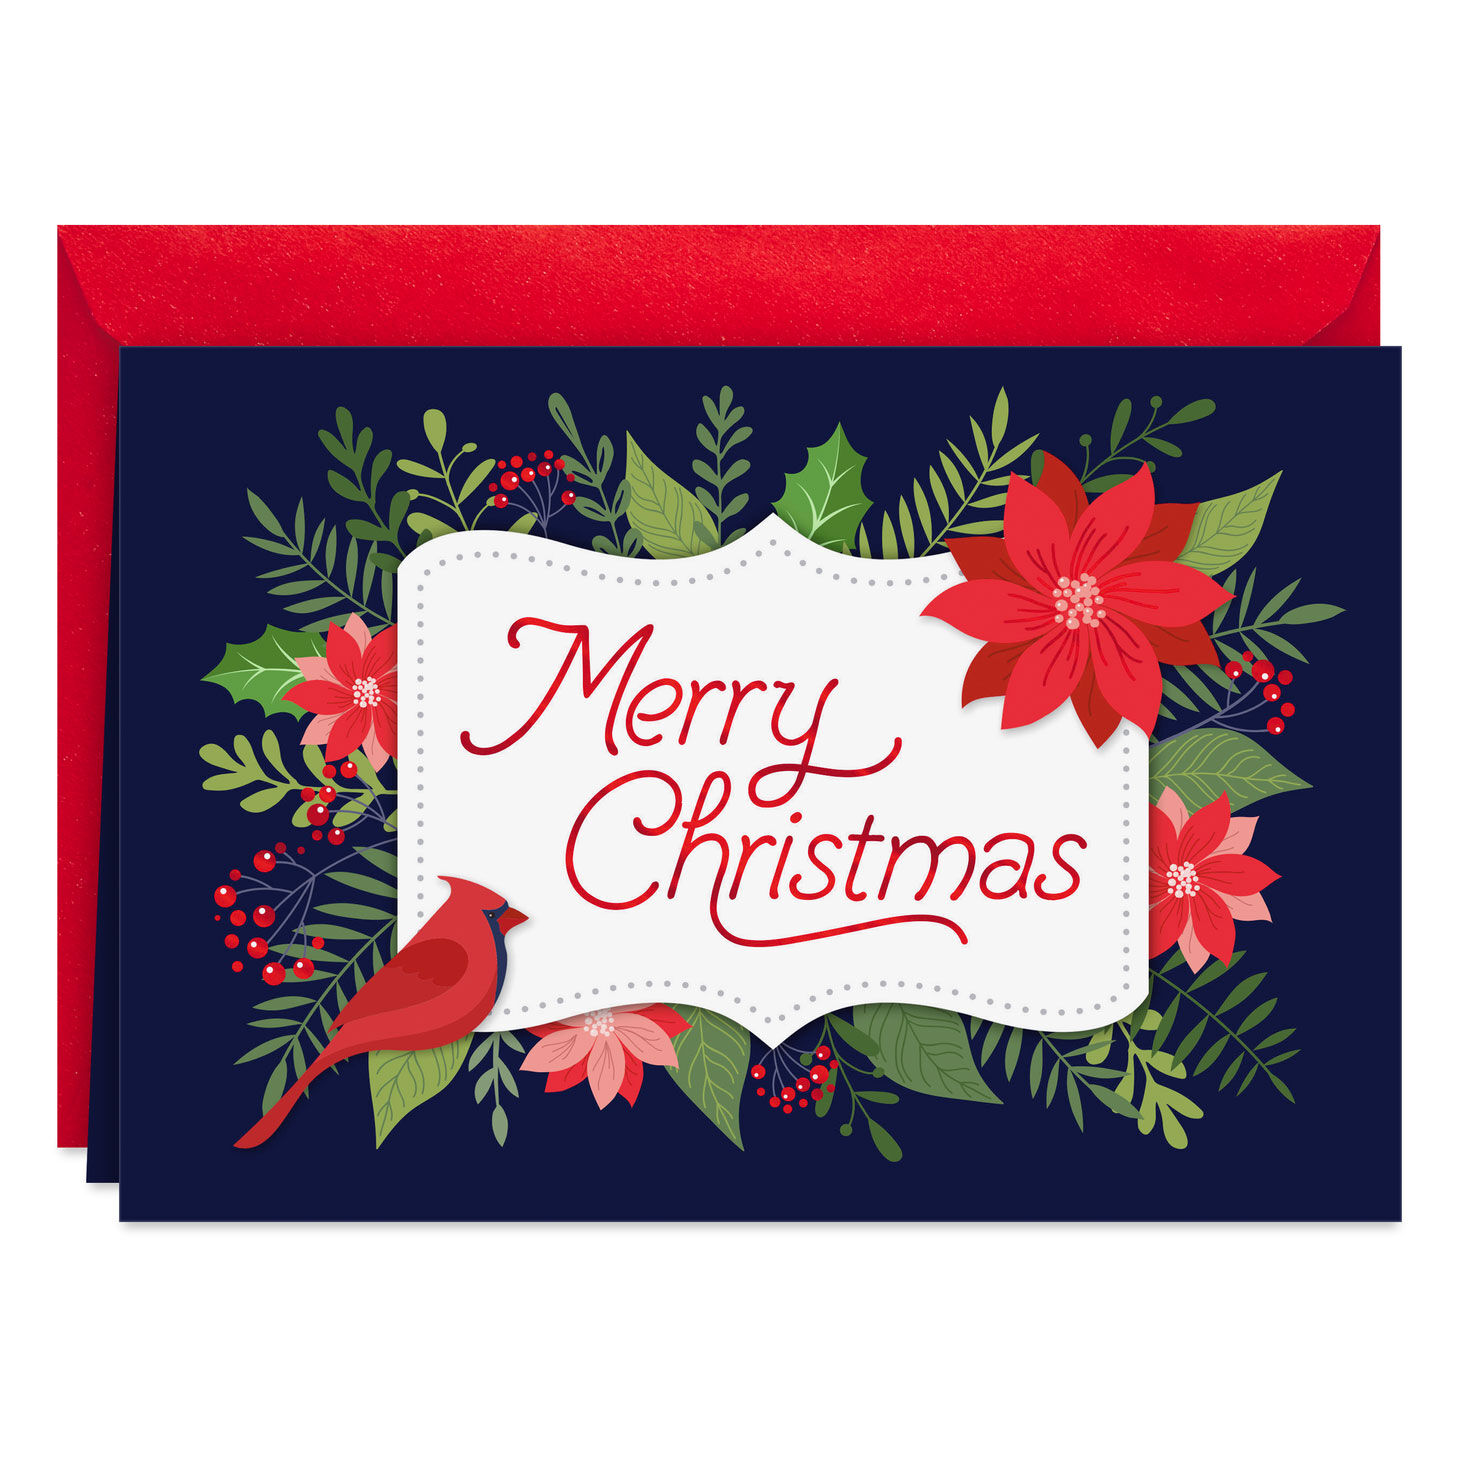 Peace to Your Home, Joy to Your Heart Christmas Card for only USD 2.00 | Hallmark